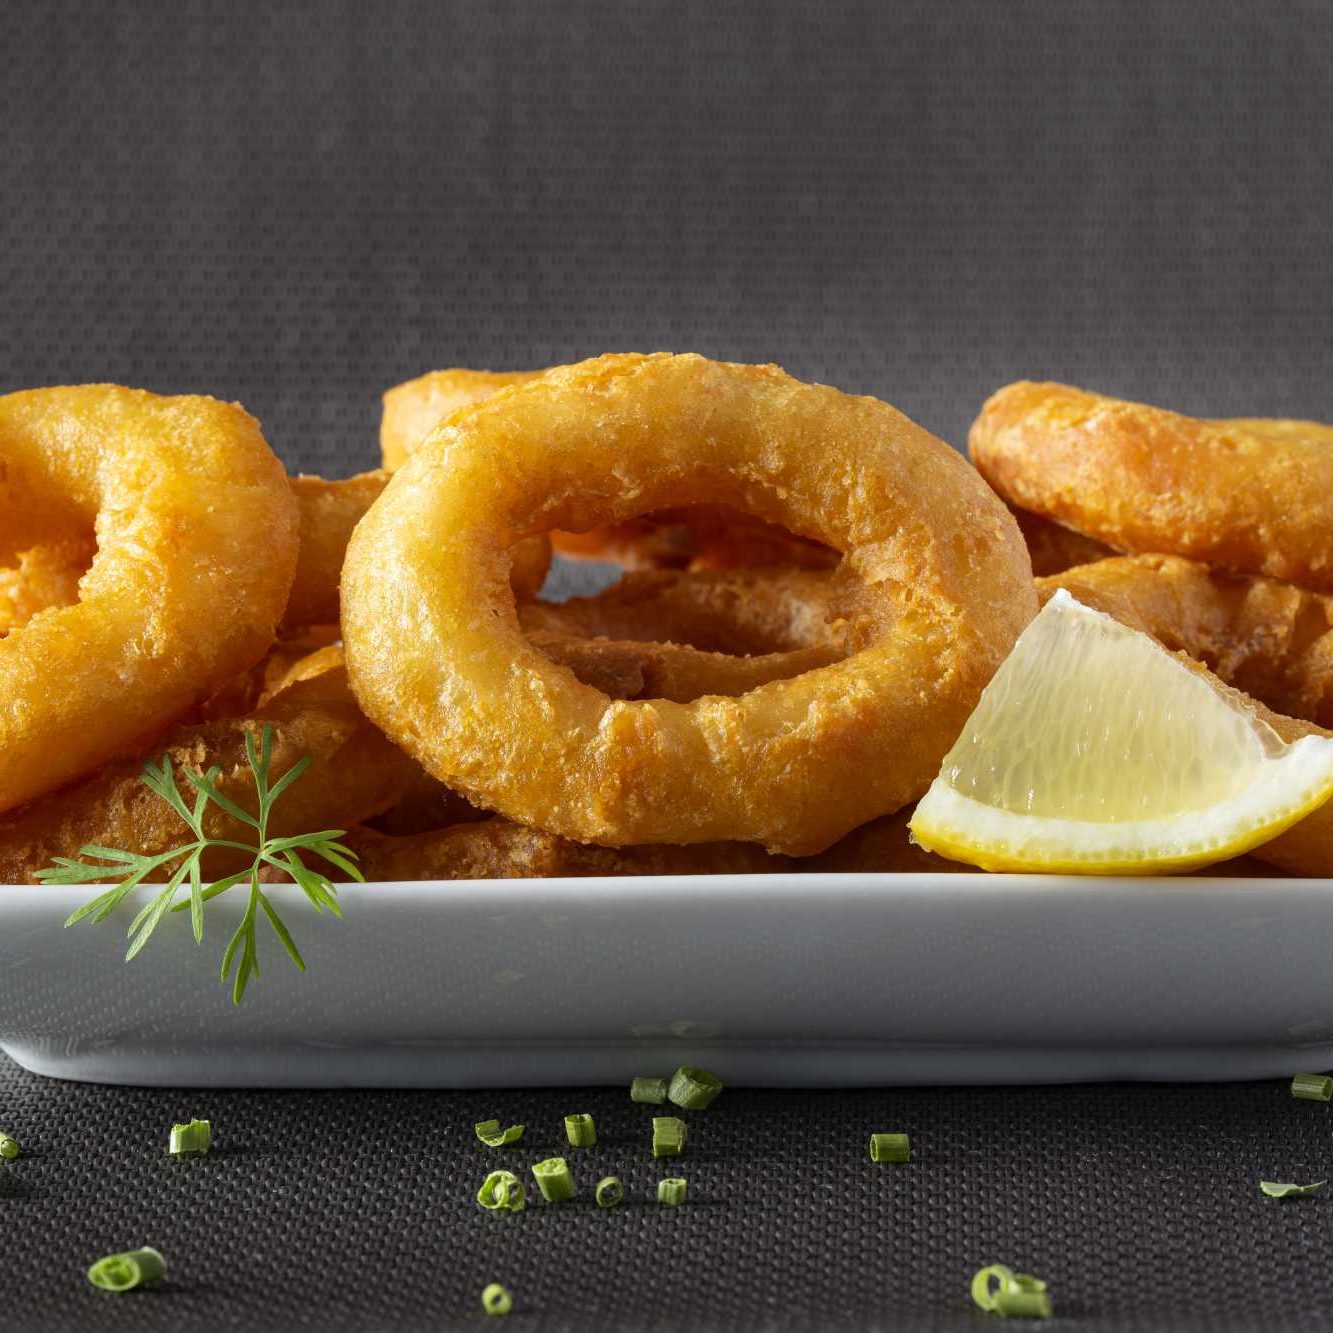 Fried calamari rings on plate with lemon and herbs